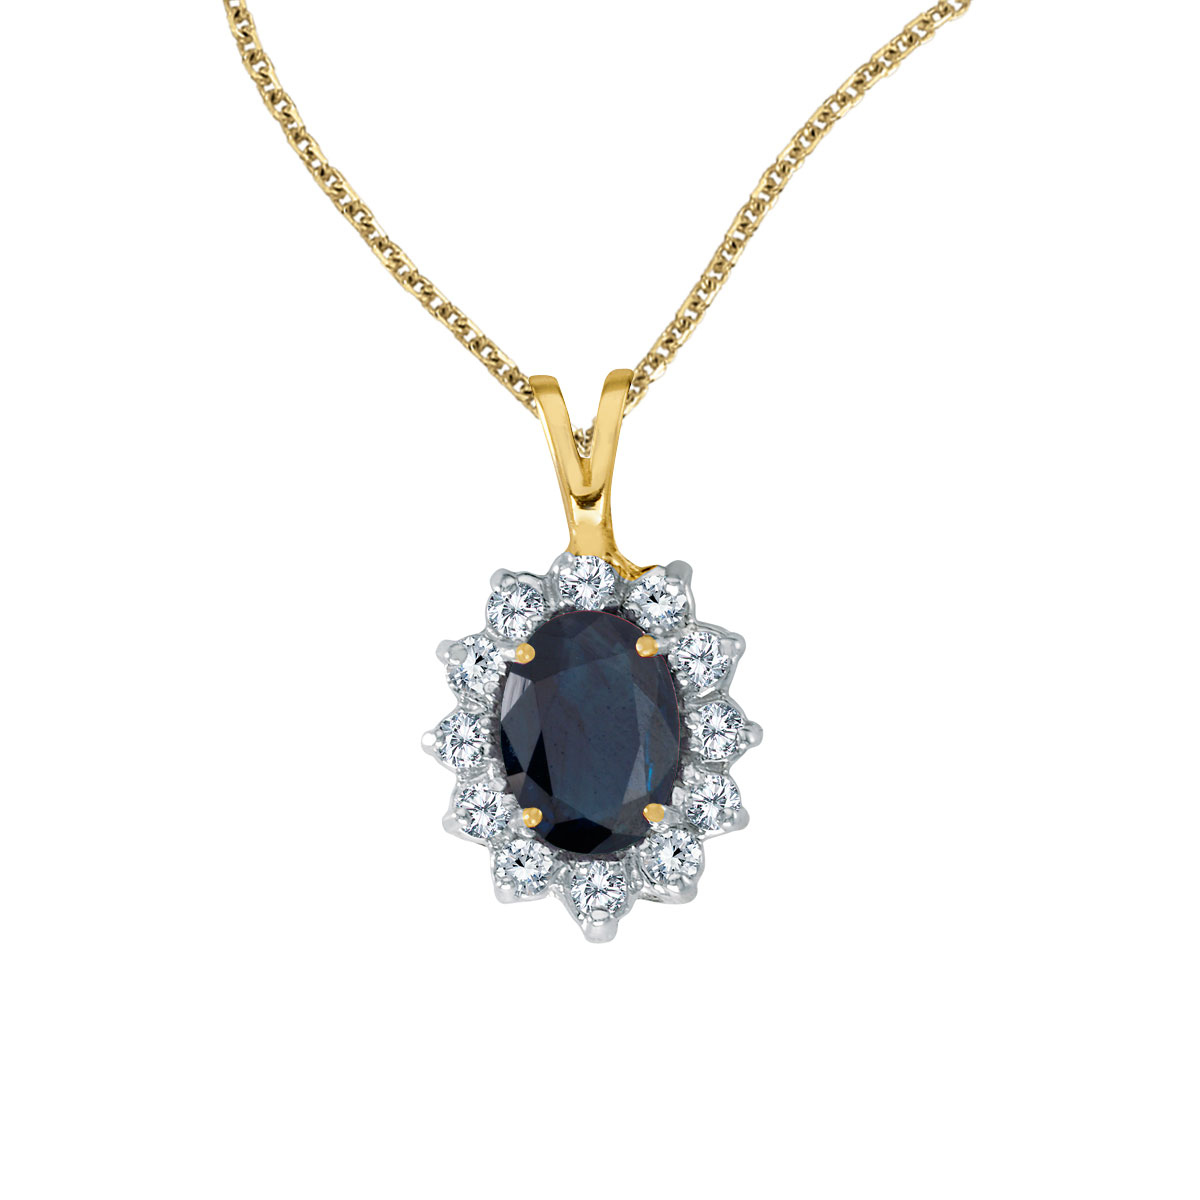 8x6 mm sapphire surrounded by .30 carats of shimmering diamonds set in 14k yellow gold. Perfect for birthdays and holidays.